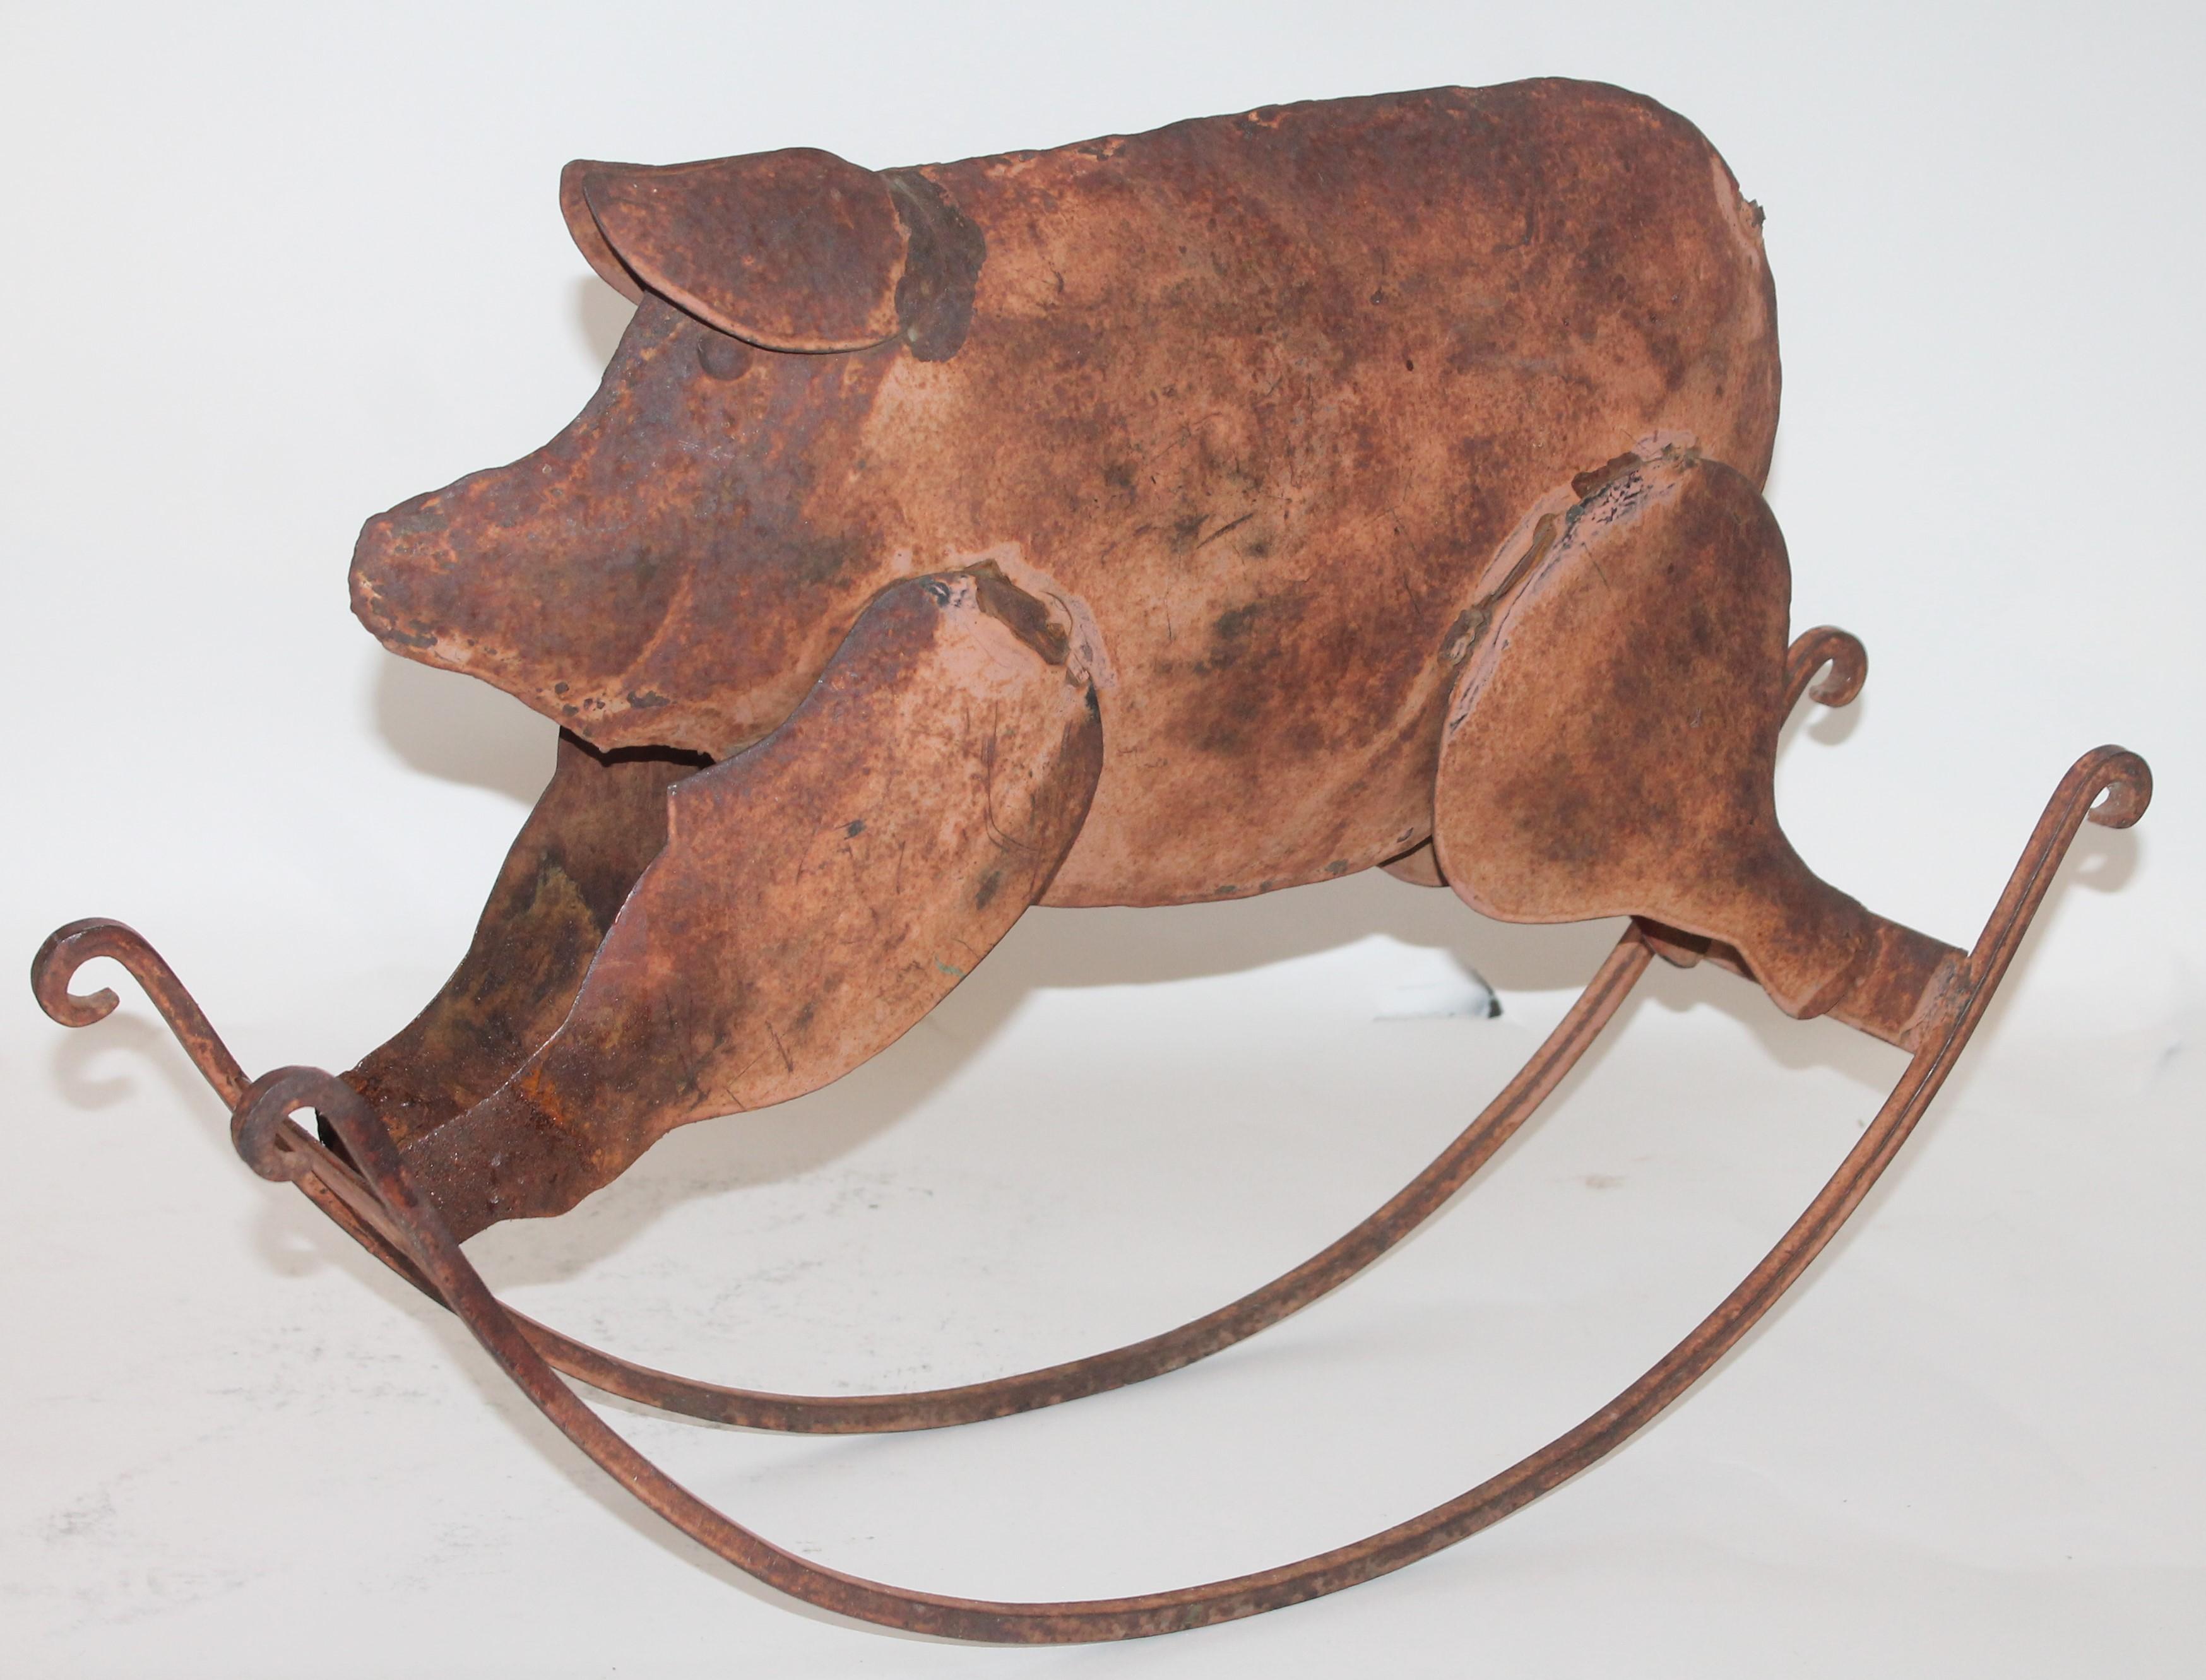 This is all original painted salmon and oxidized metal pig is handmade and in very good as found condition. Wonderful Folk Art and great above a cupboard.